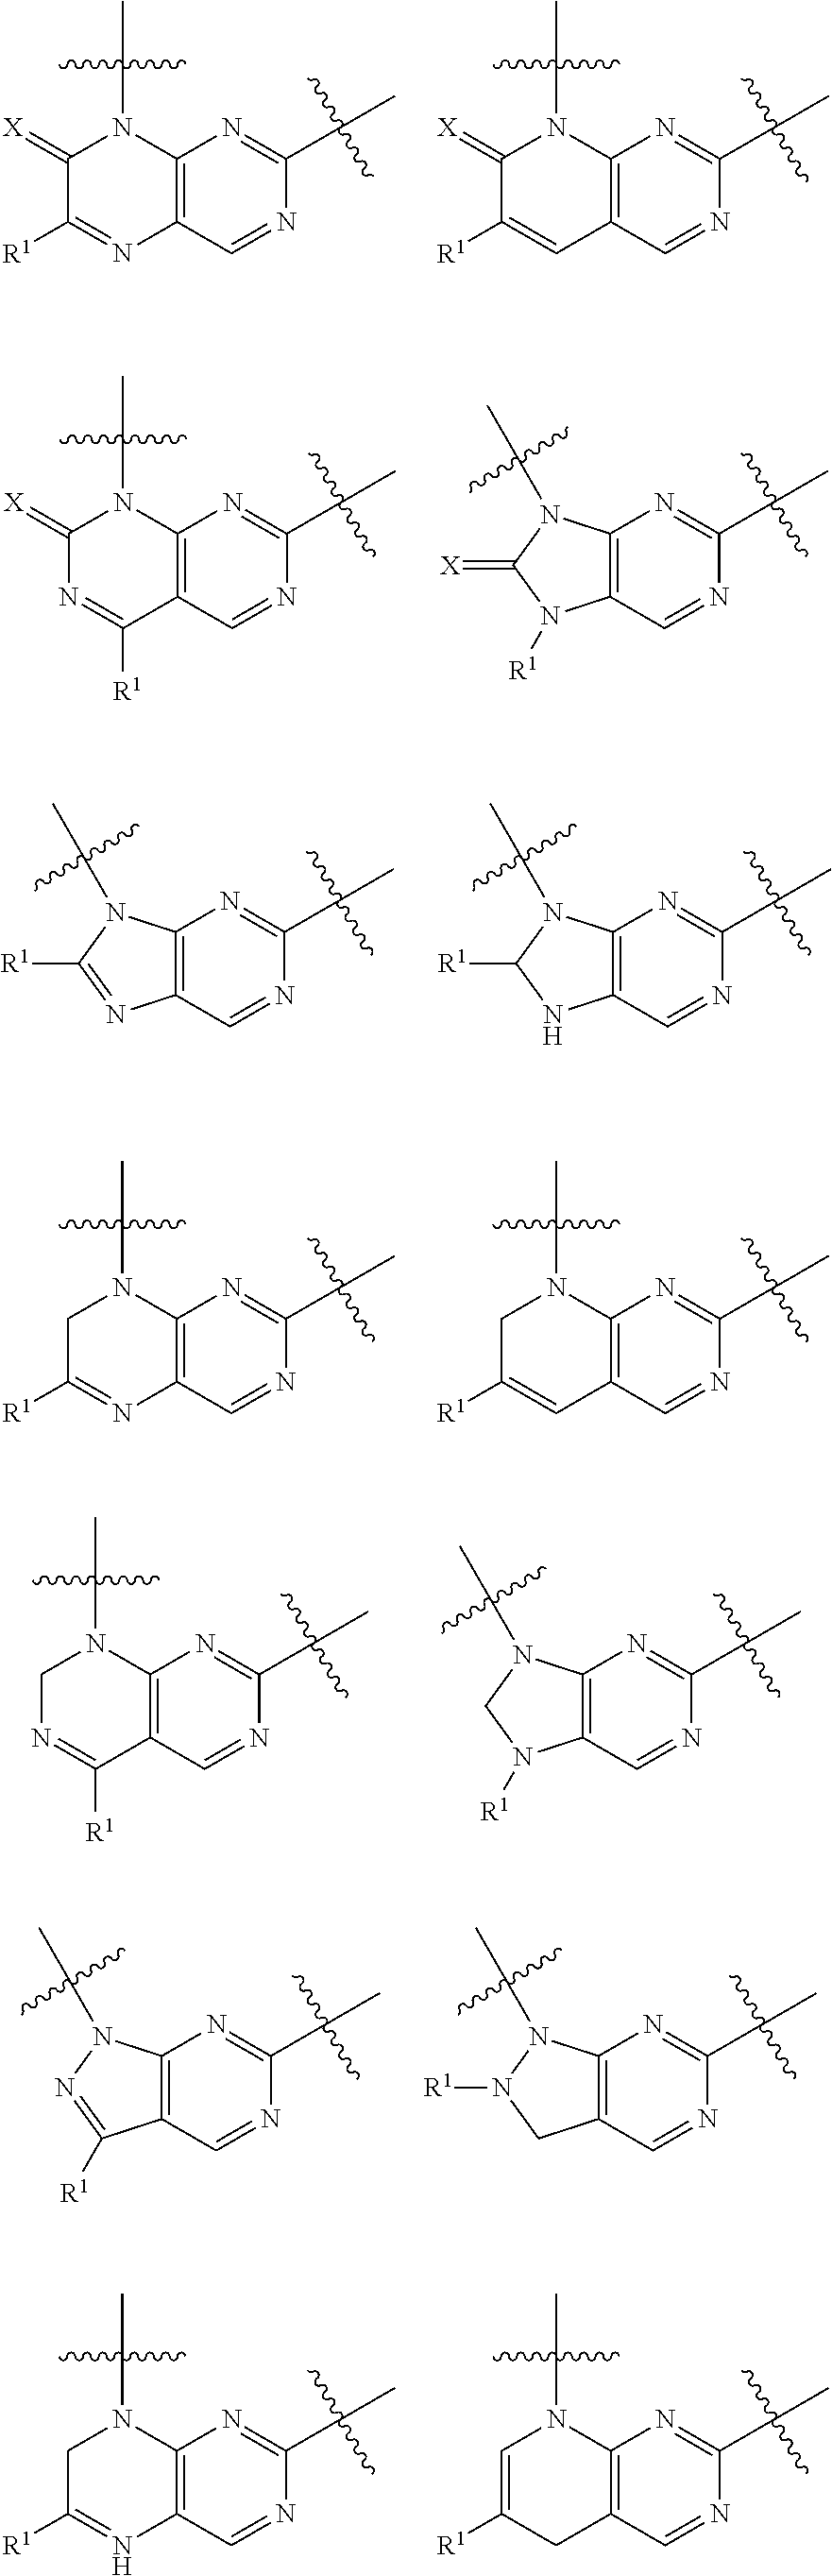 Pteridine ketone derivative and applications thereof as egfr, blk, and flt3 inhibitor